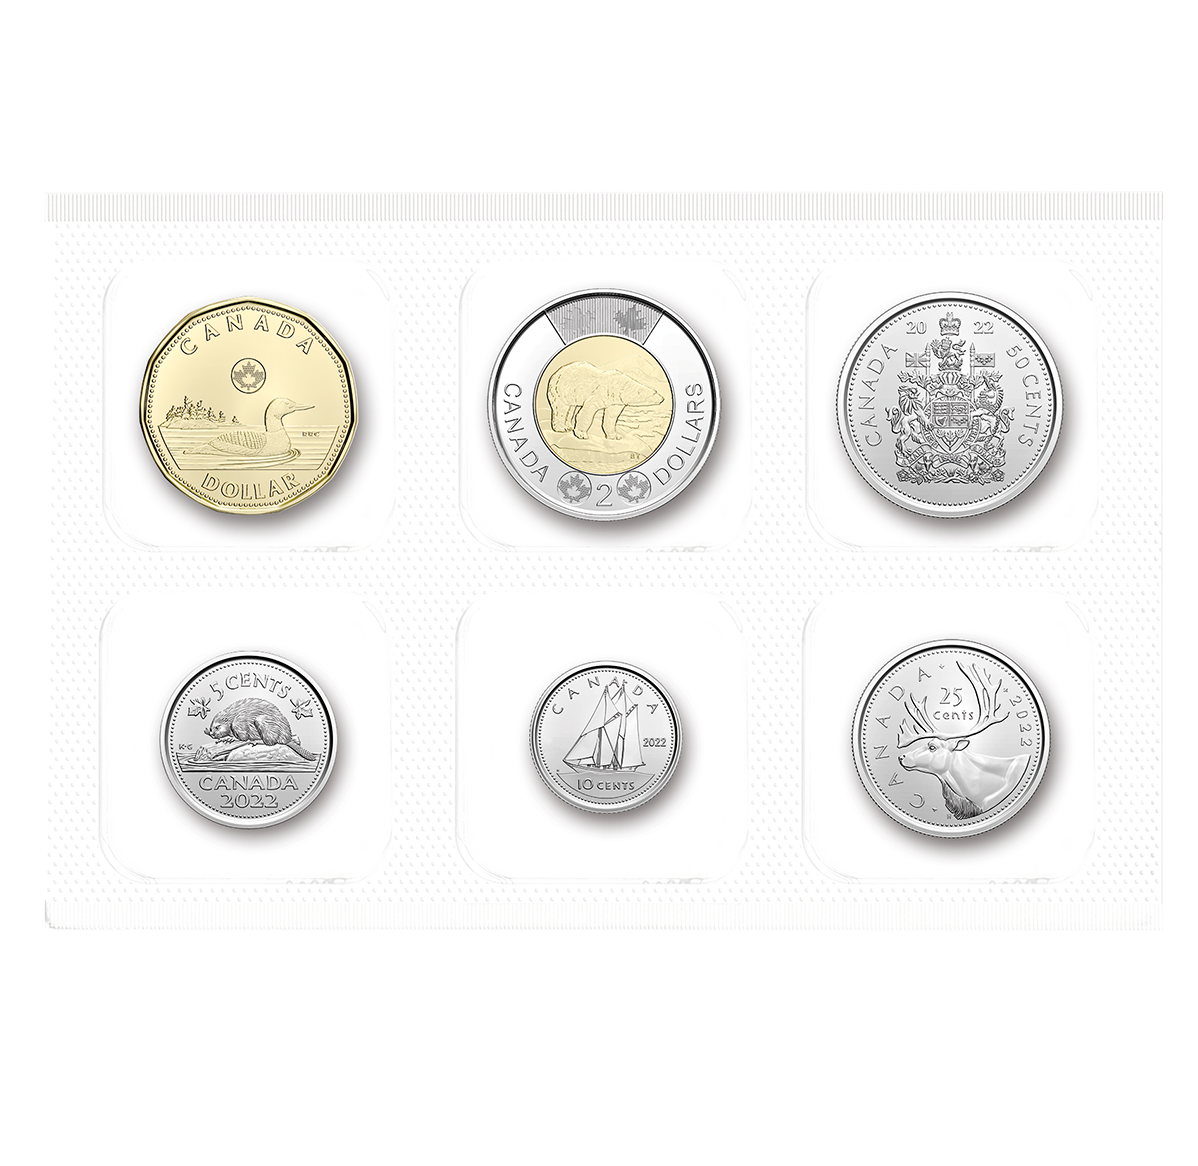 CANADA 2019 COMPLETE COIN SET 5 CENTS TO 2 DOLLARS UNCIRCULATED 6 COINS 